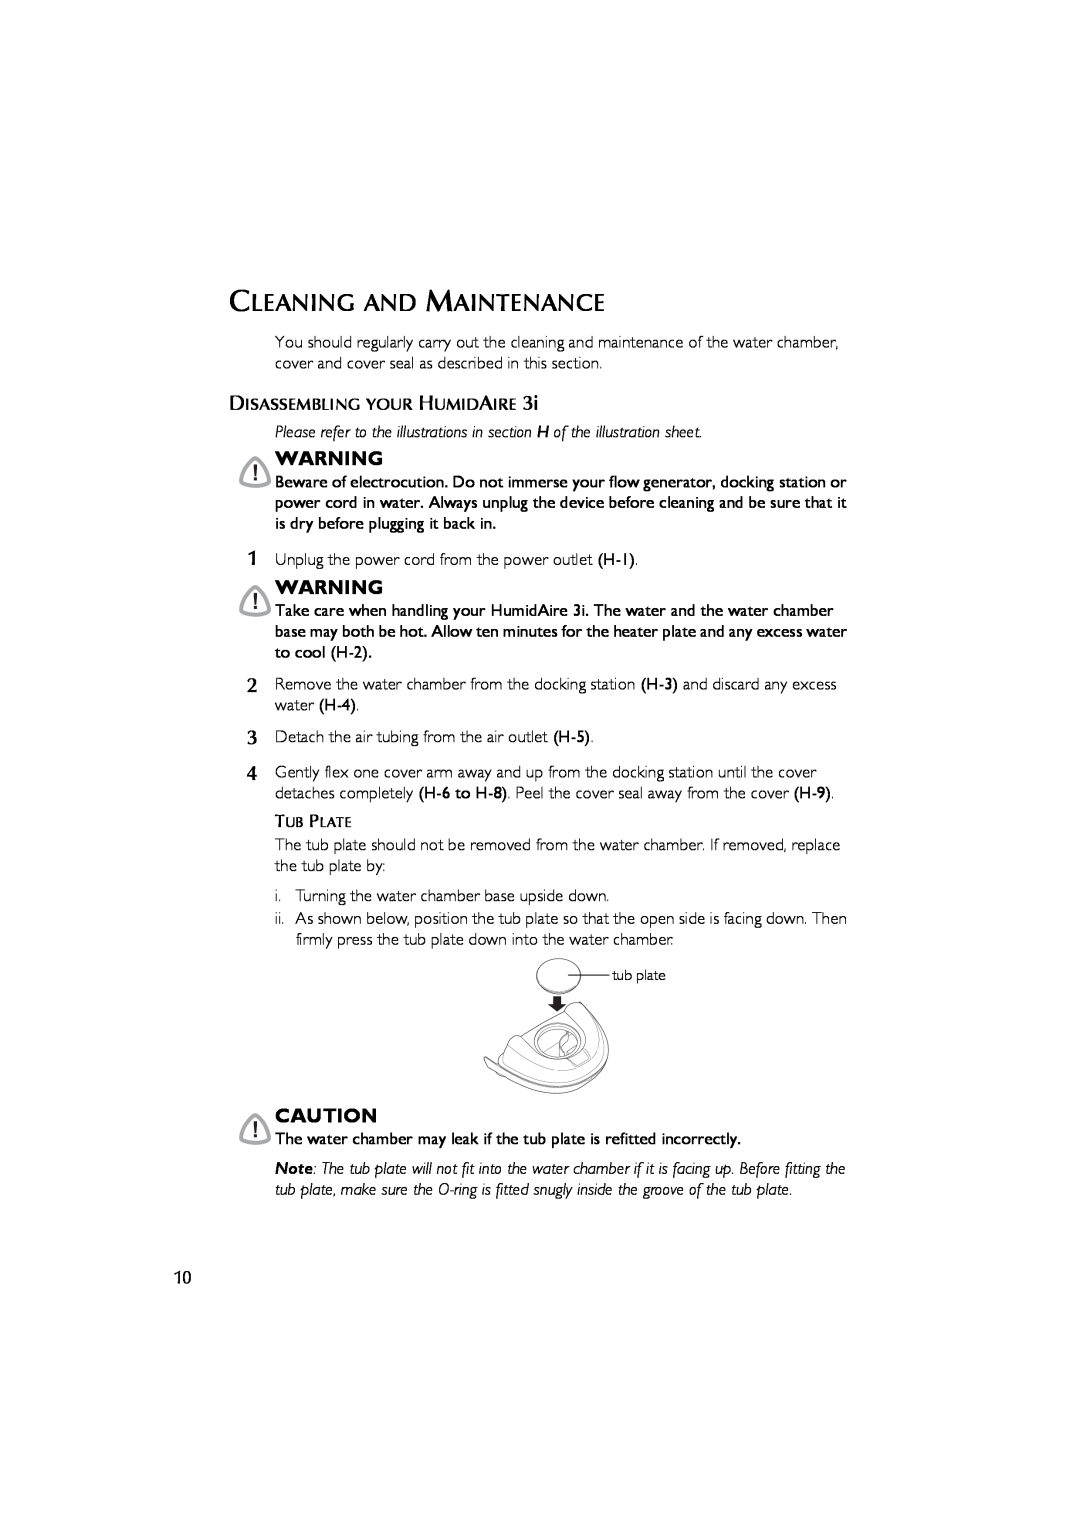 ResMed Humidifier user manual Cleaning And Maintenance 